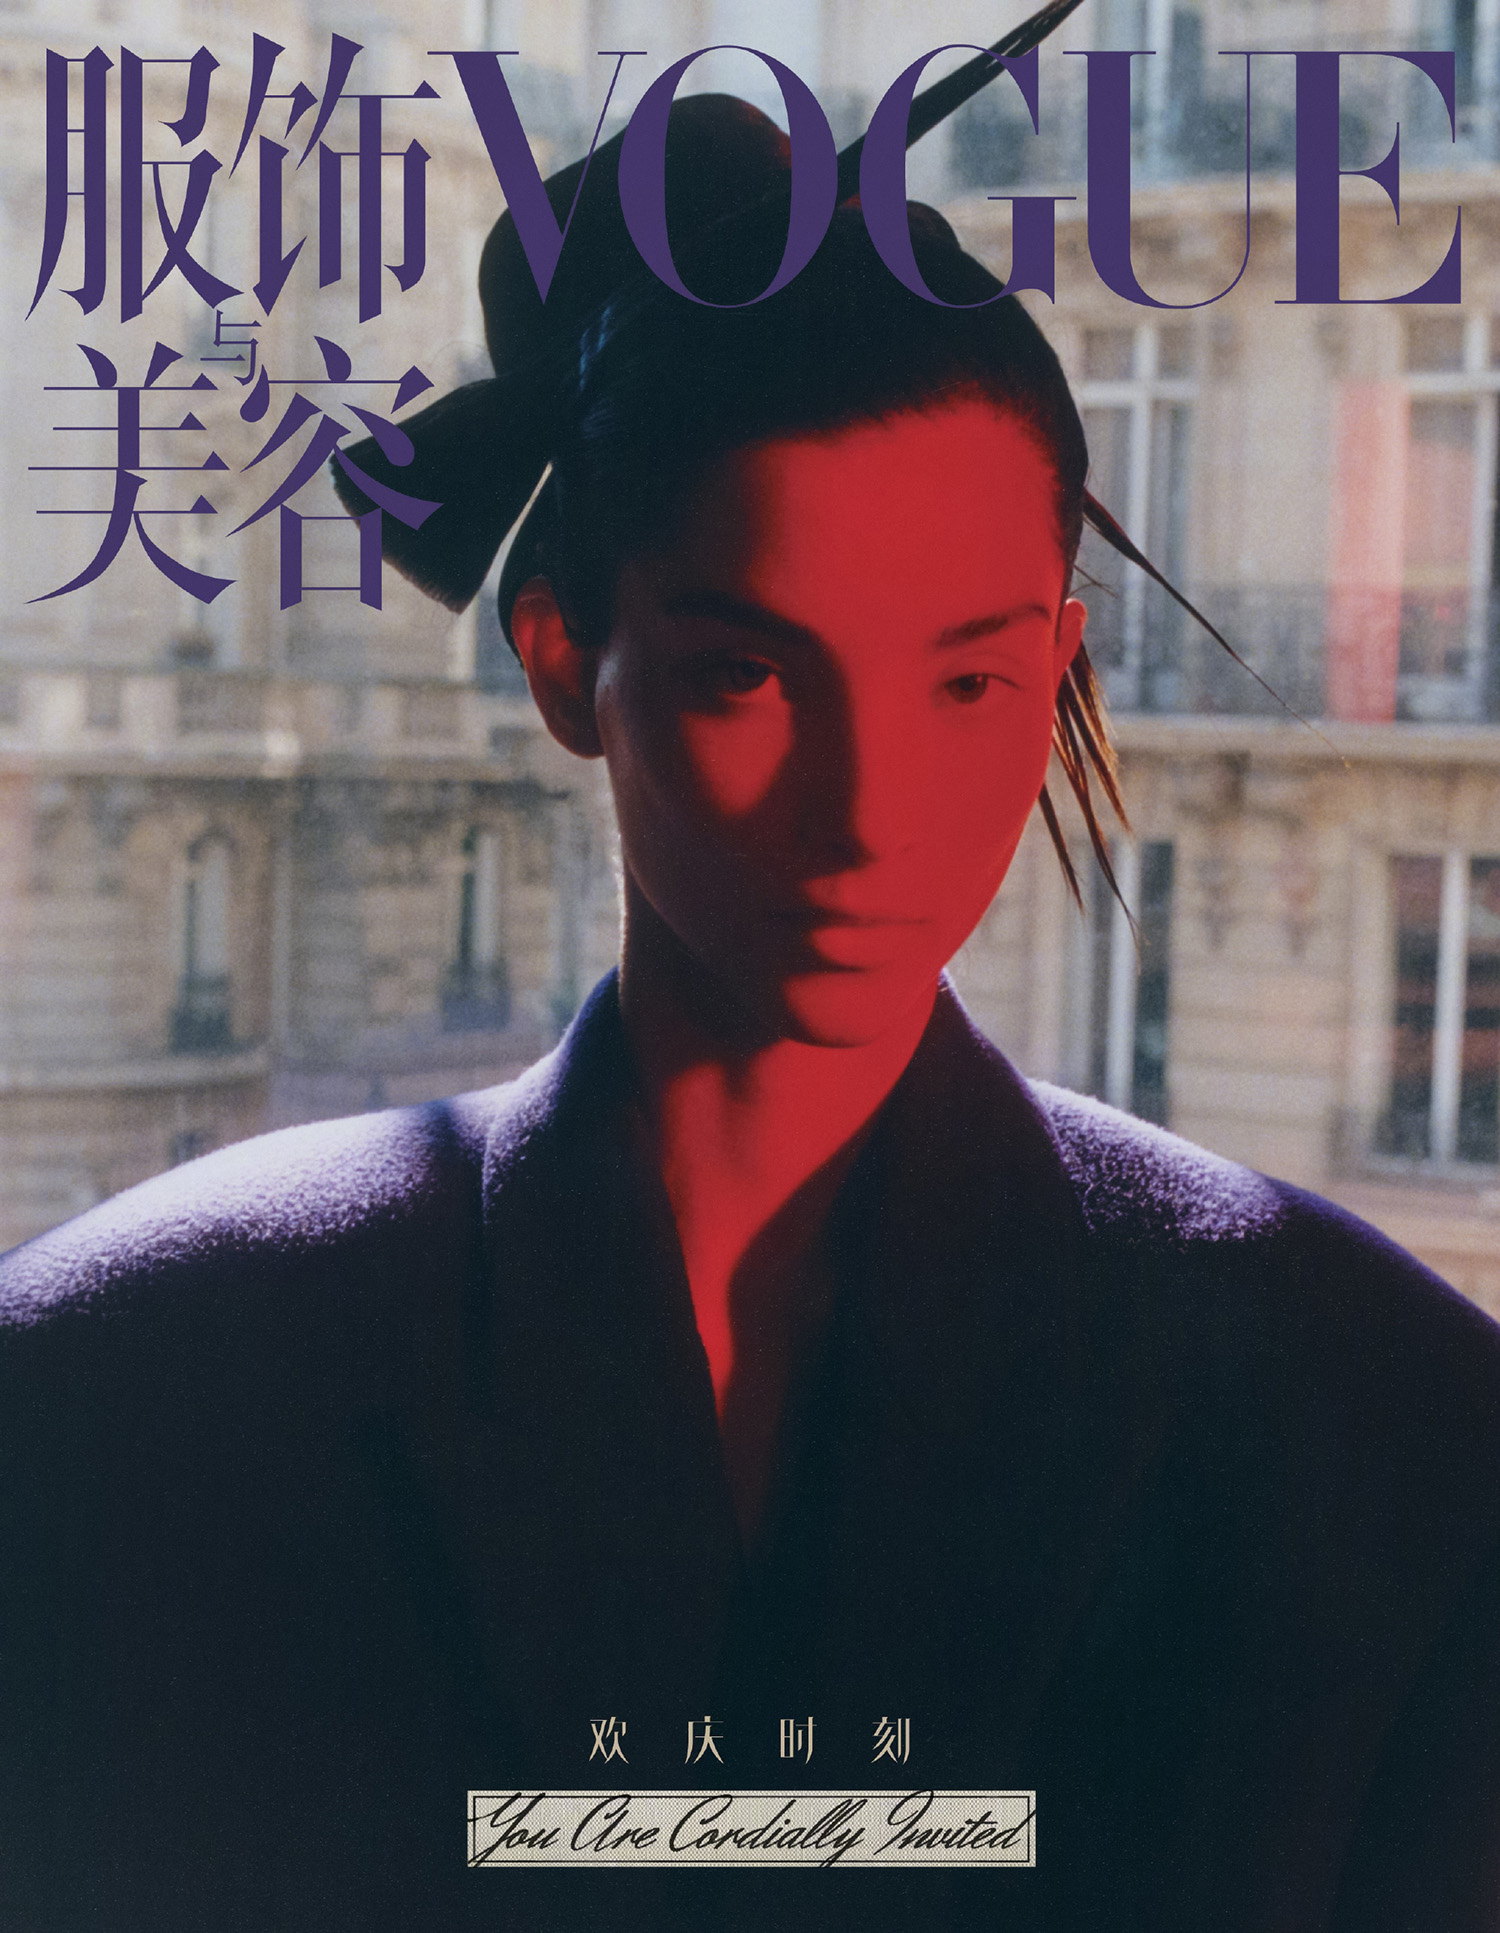 Vogue China December 2021 covers by Lee Wei Swee